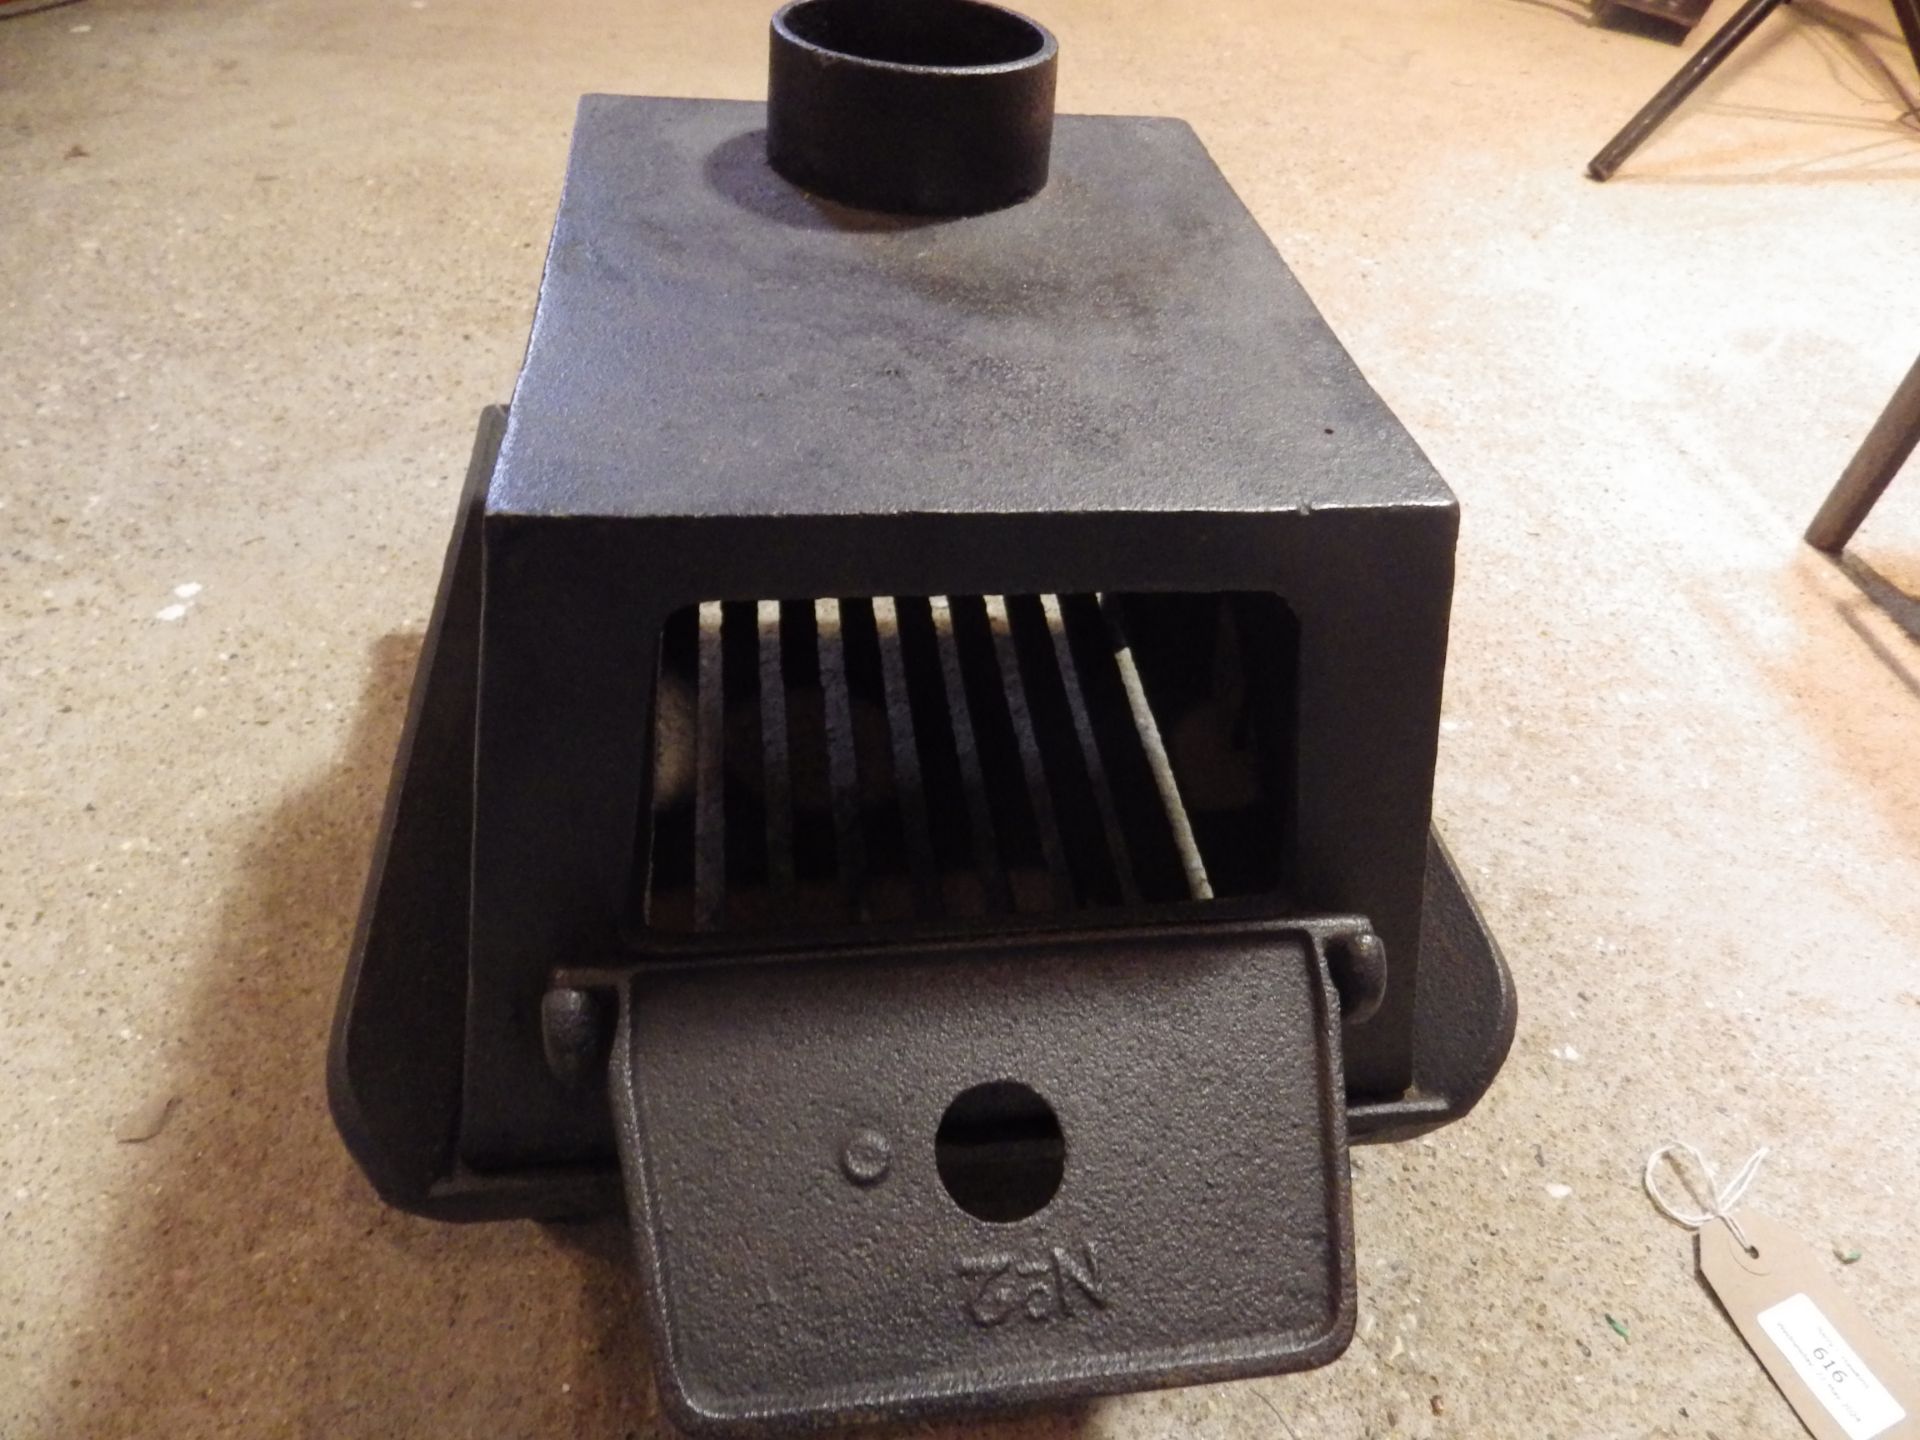 No.2 Squat cast iron stove with grate and hinged door and chimney flue stand rest for 3 irons - Image 2 of 4